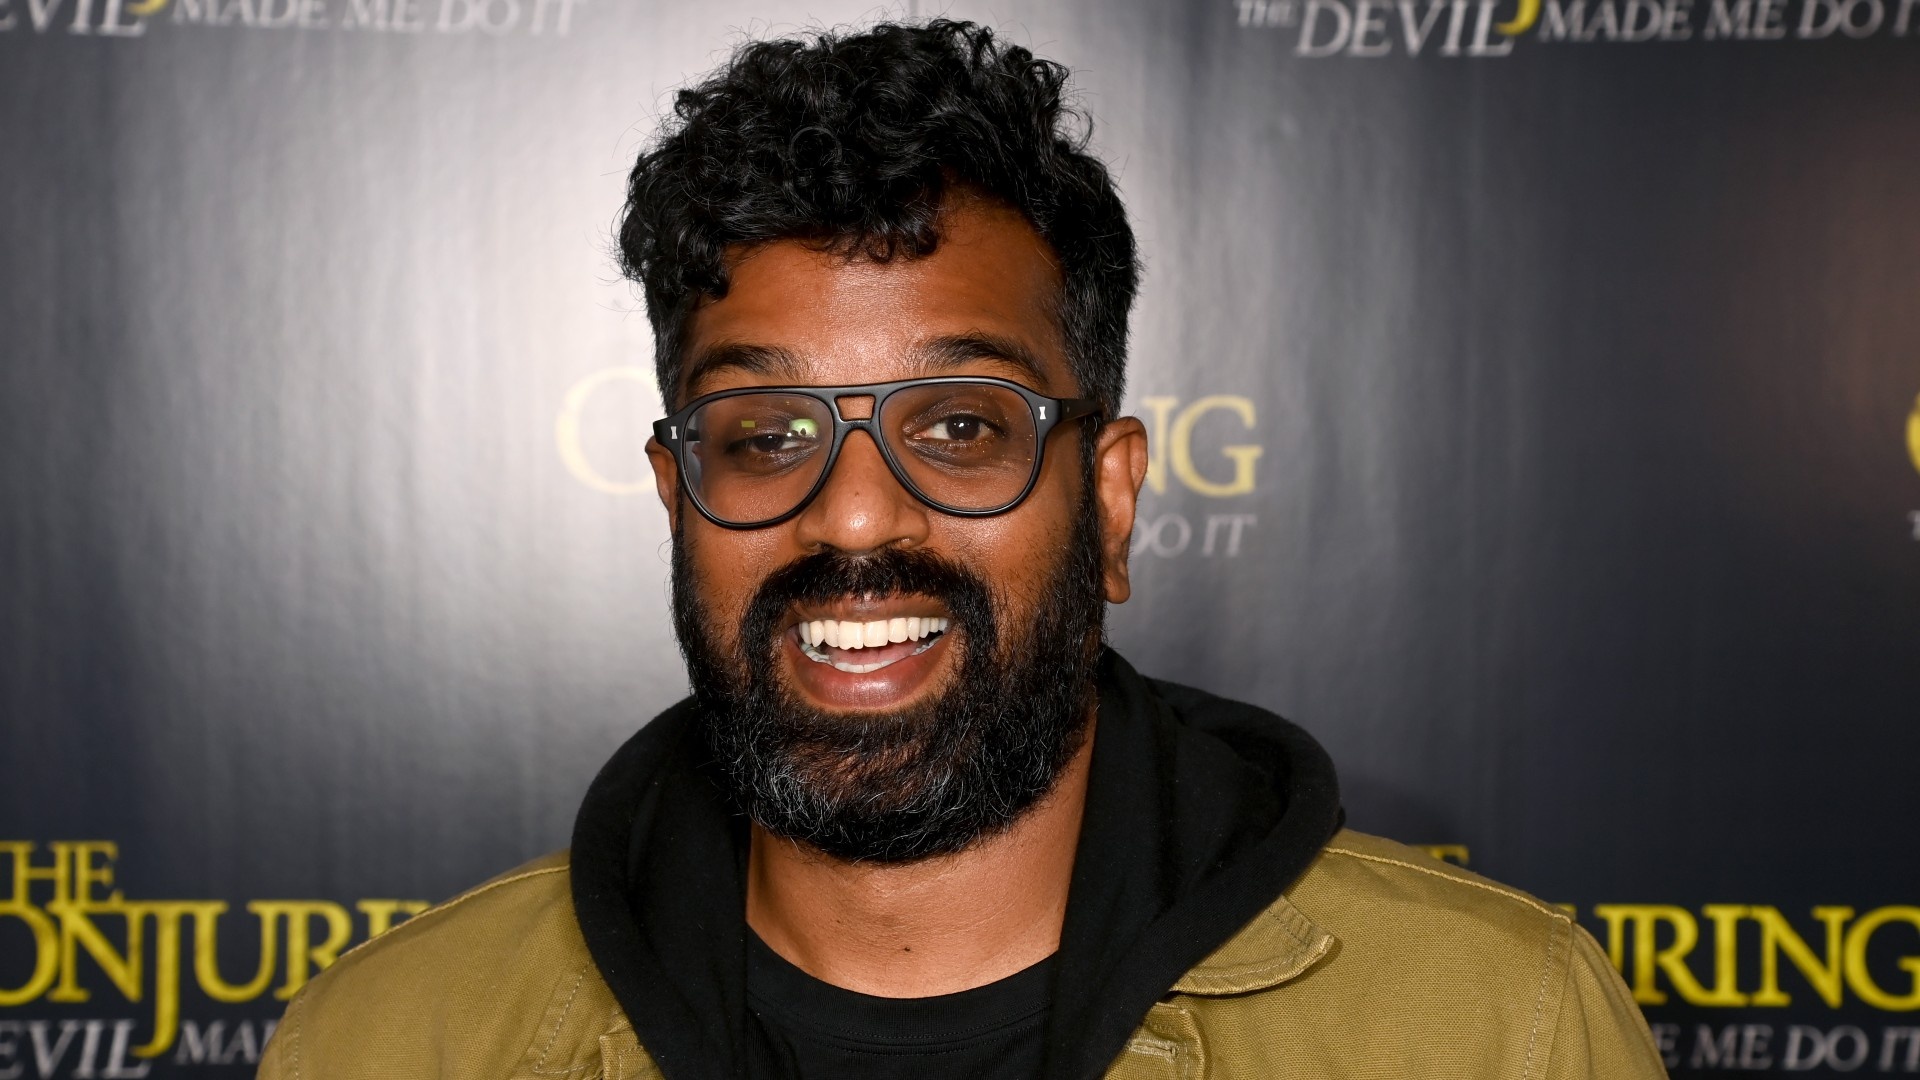 Romesh Ranganathan: The Conjuring: The Devil Made Me Do It horror 2021 film premiere. 1920x1080 Full HD Wallpaper.